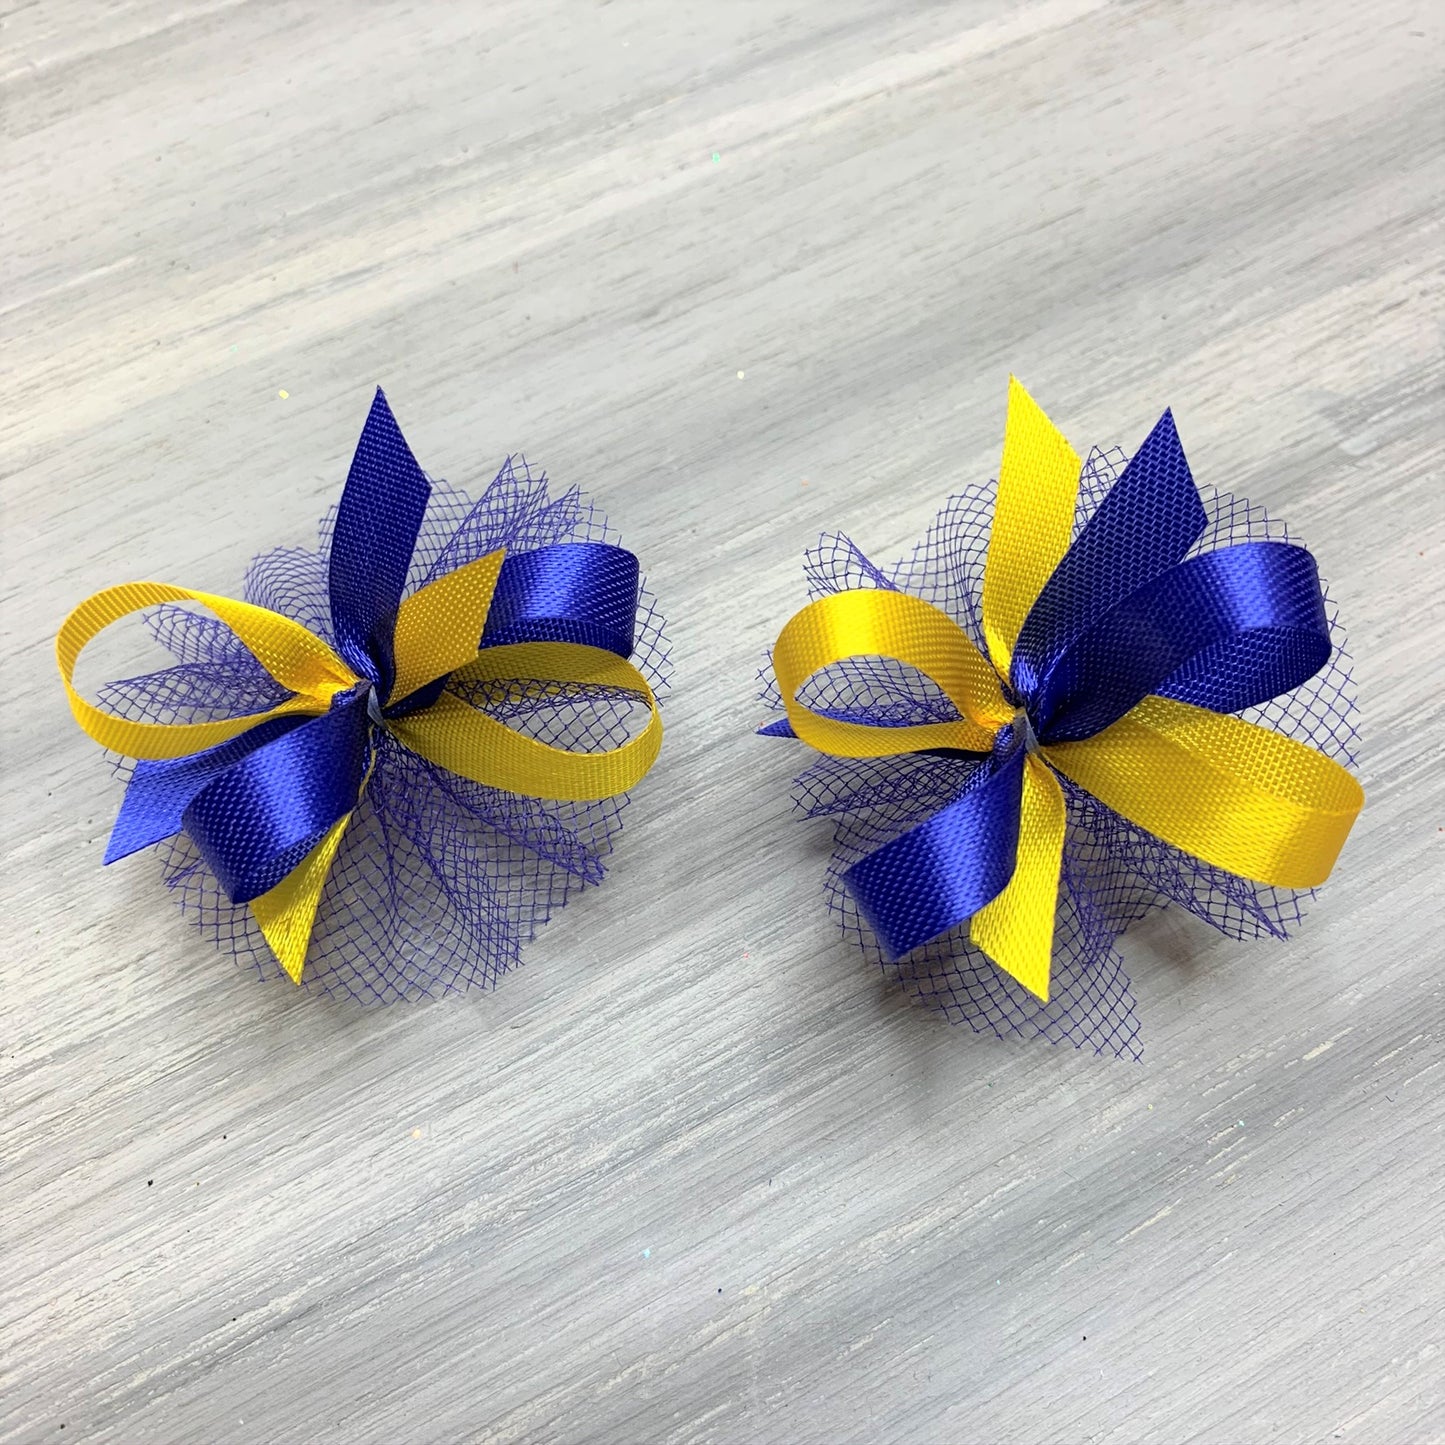 High School & College Color Bows - Blue and Gold - 30 Bows